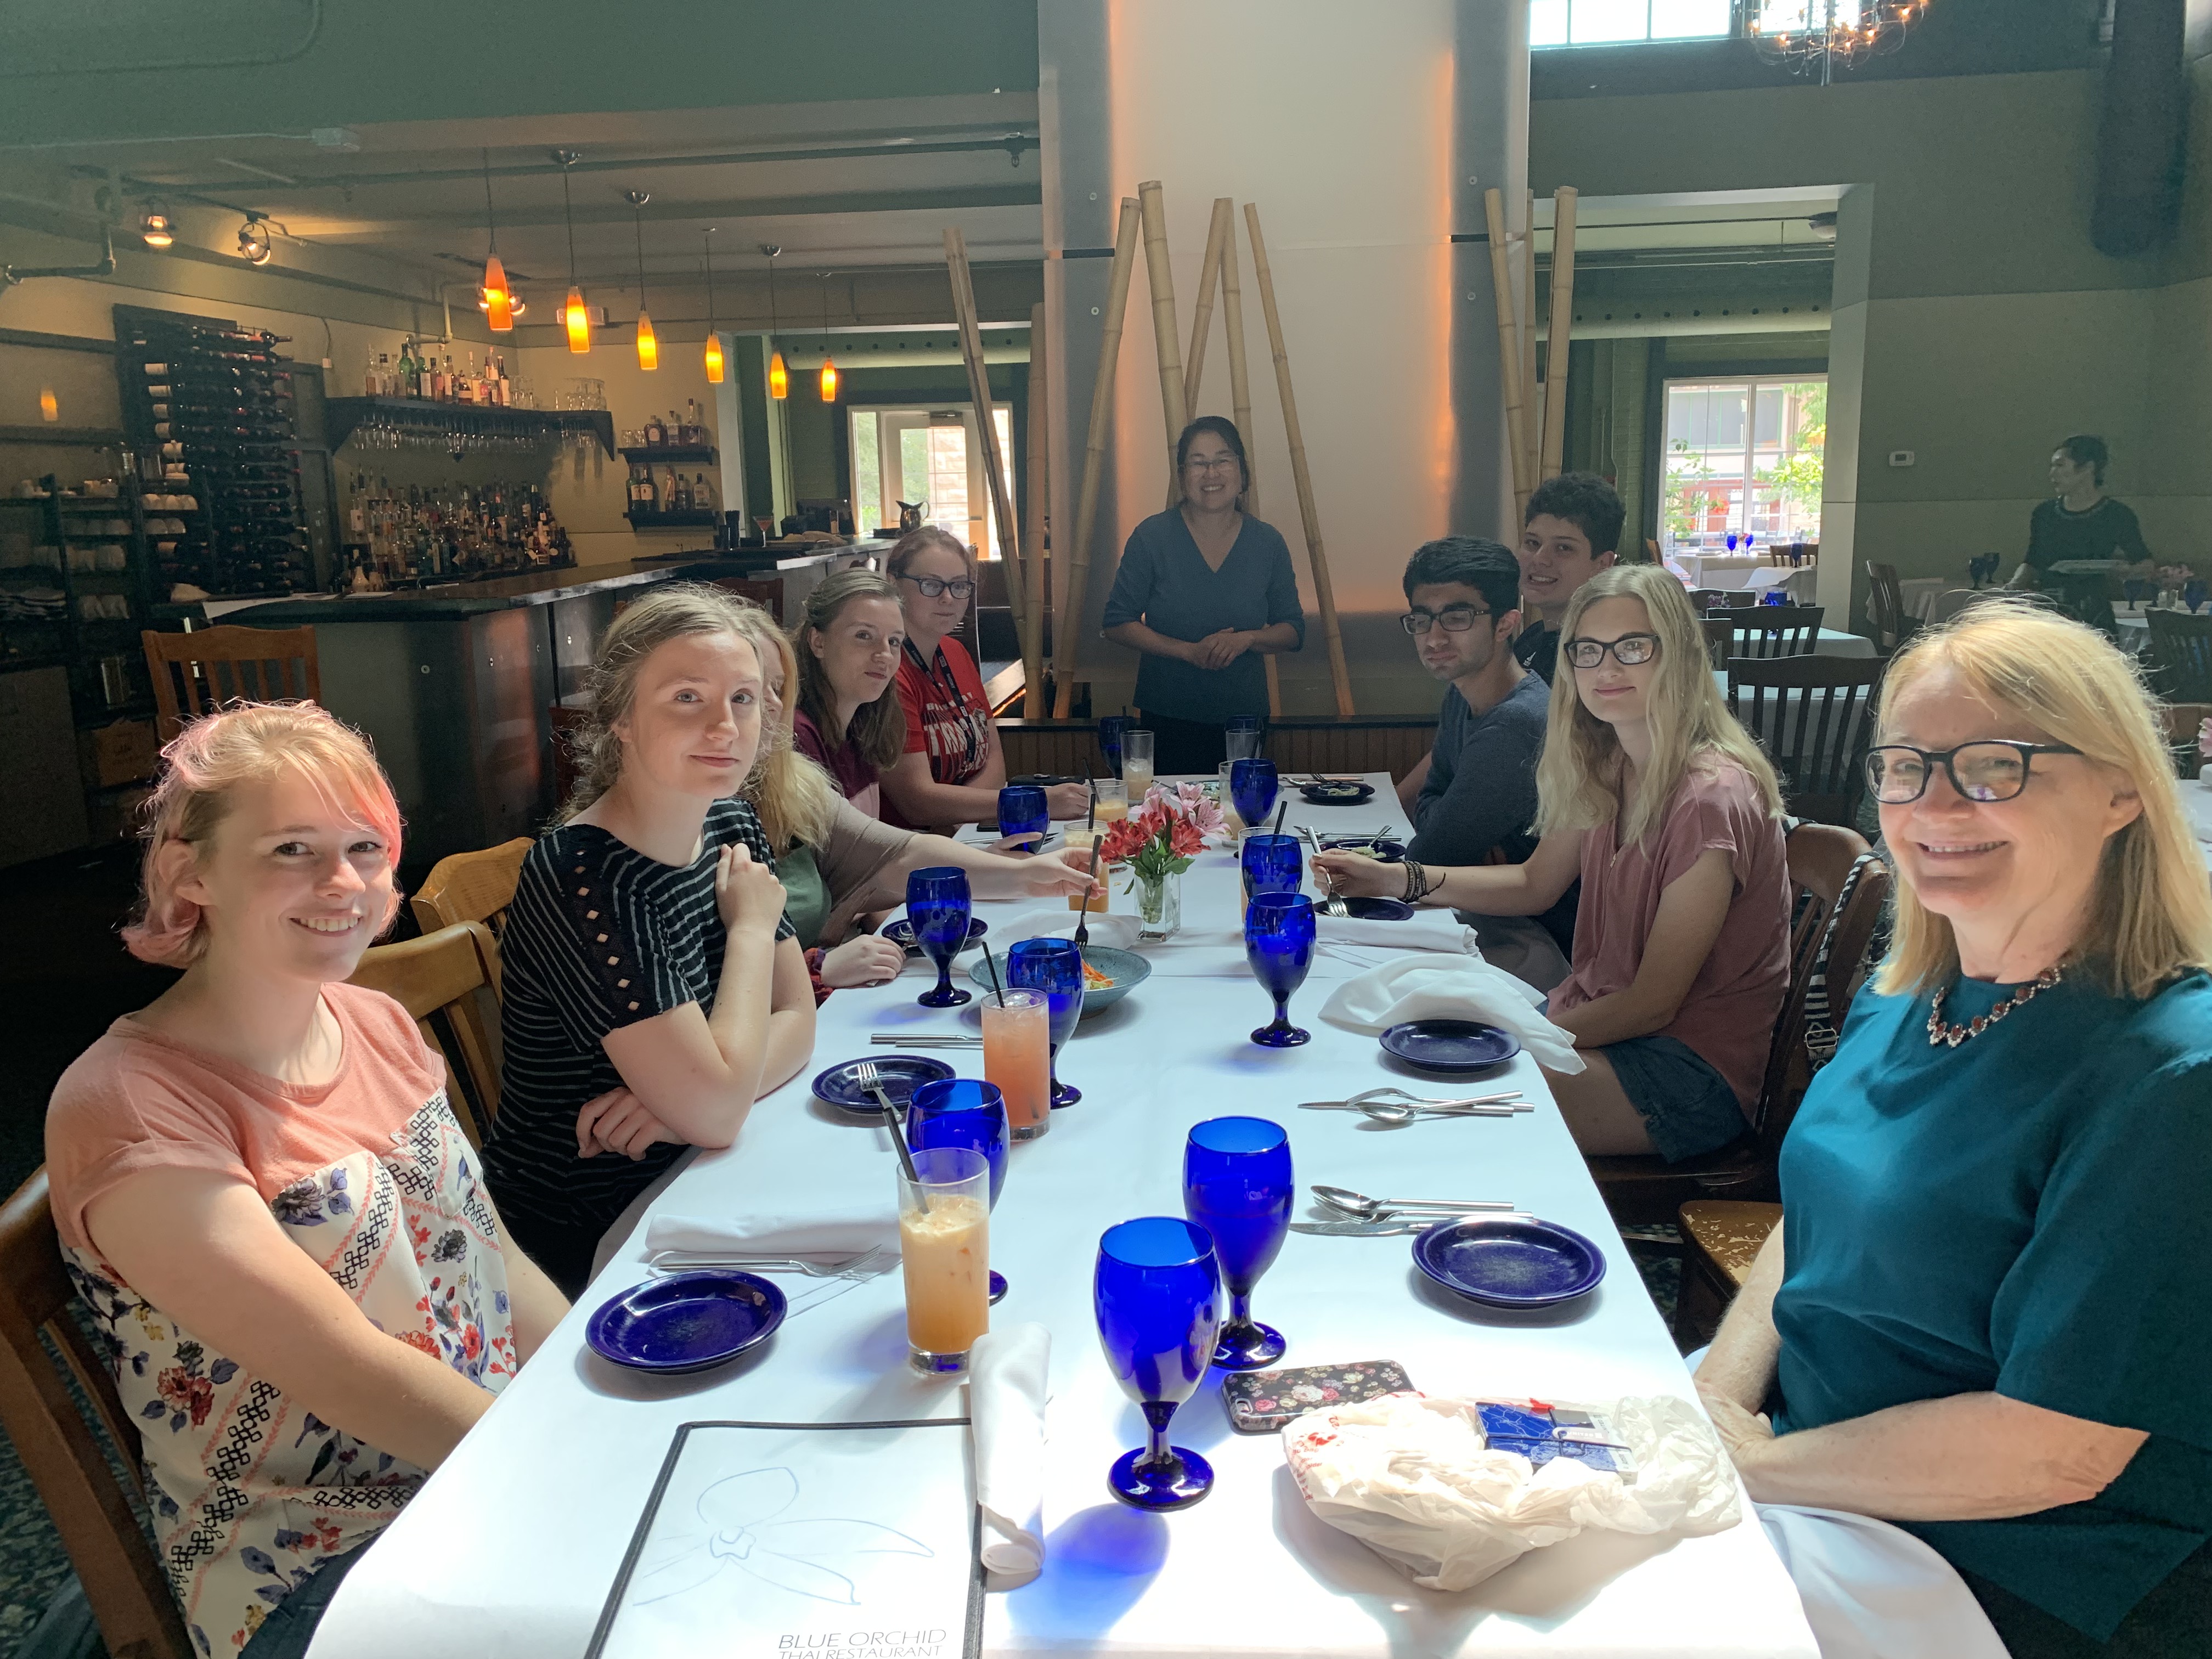 Students got to enjoy a Thai meal at Blue Orchid, meet the owner, Malinee Kiatathikom, learn about Thai food and meet Dean Amy Struthers.